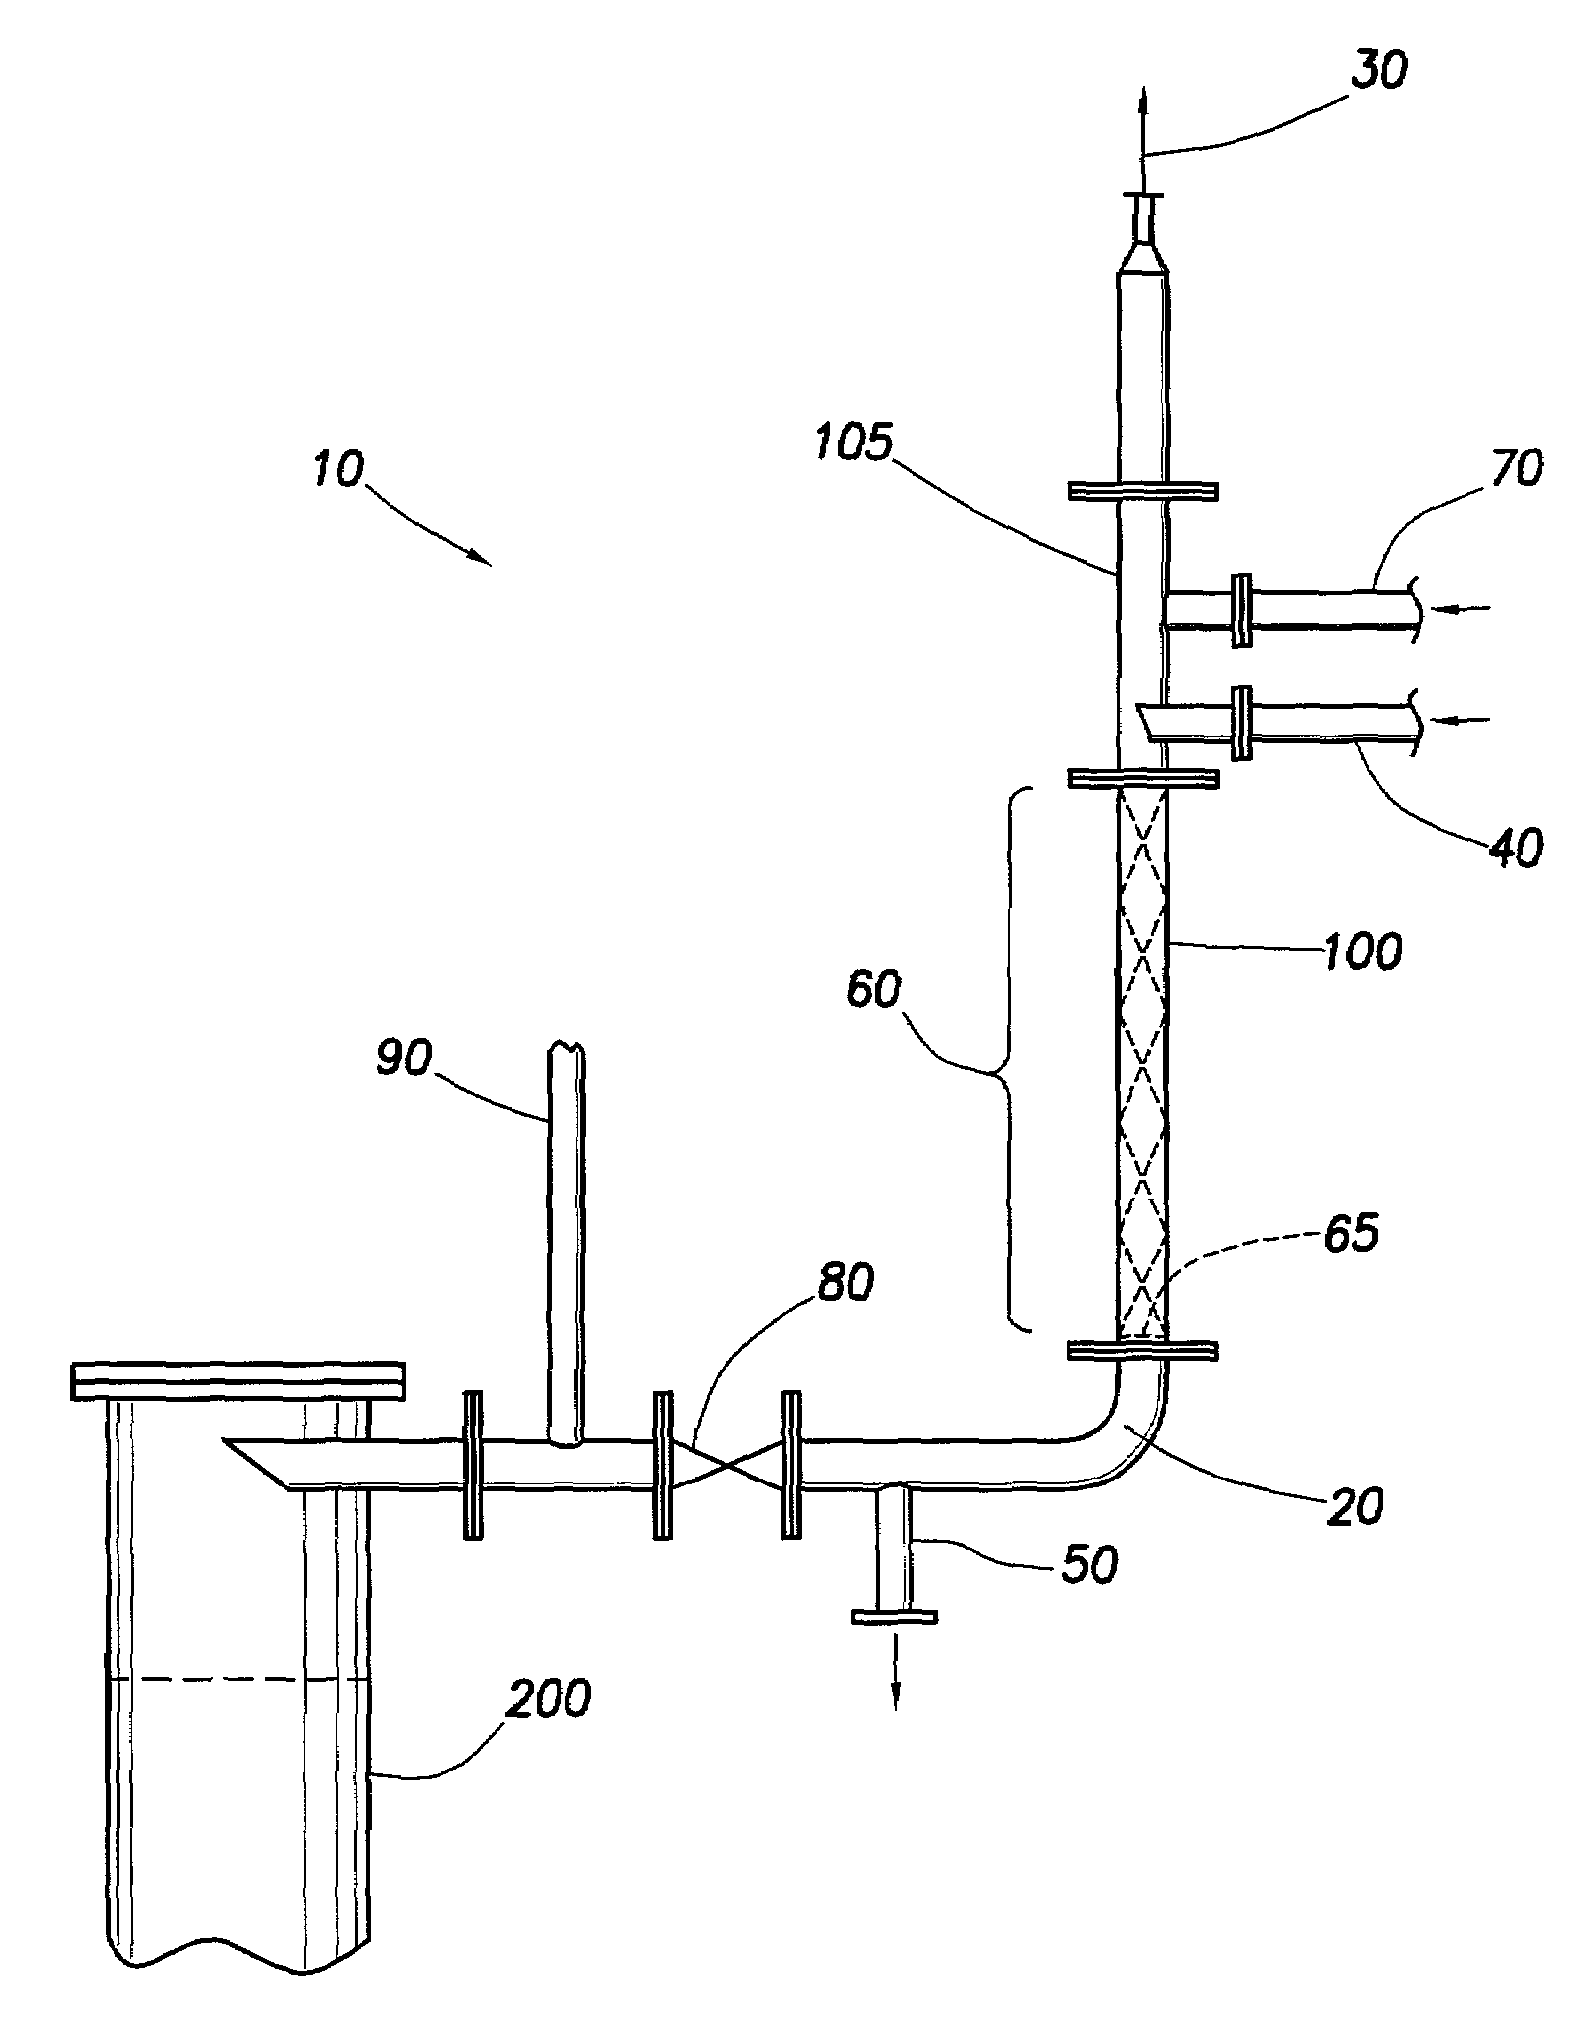 Process for removing sulfides